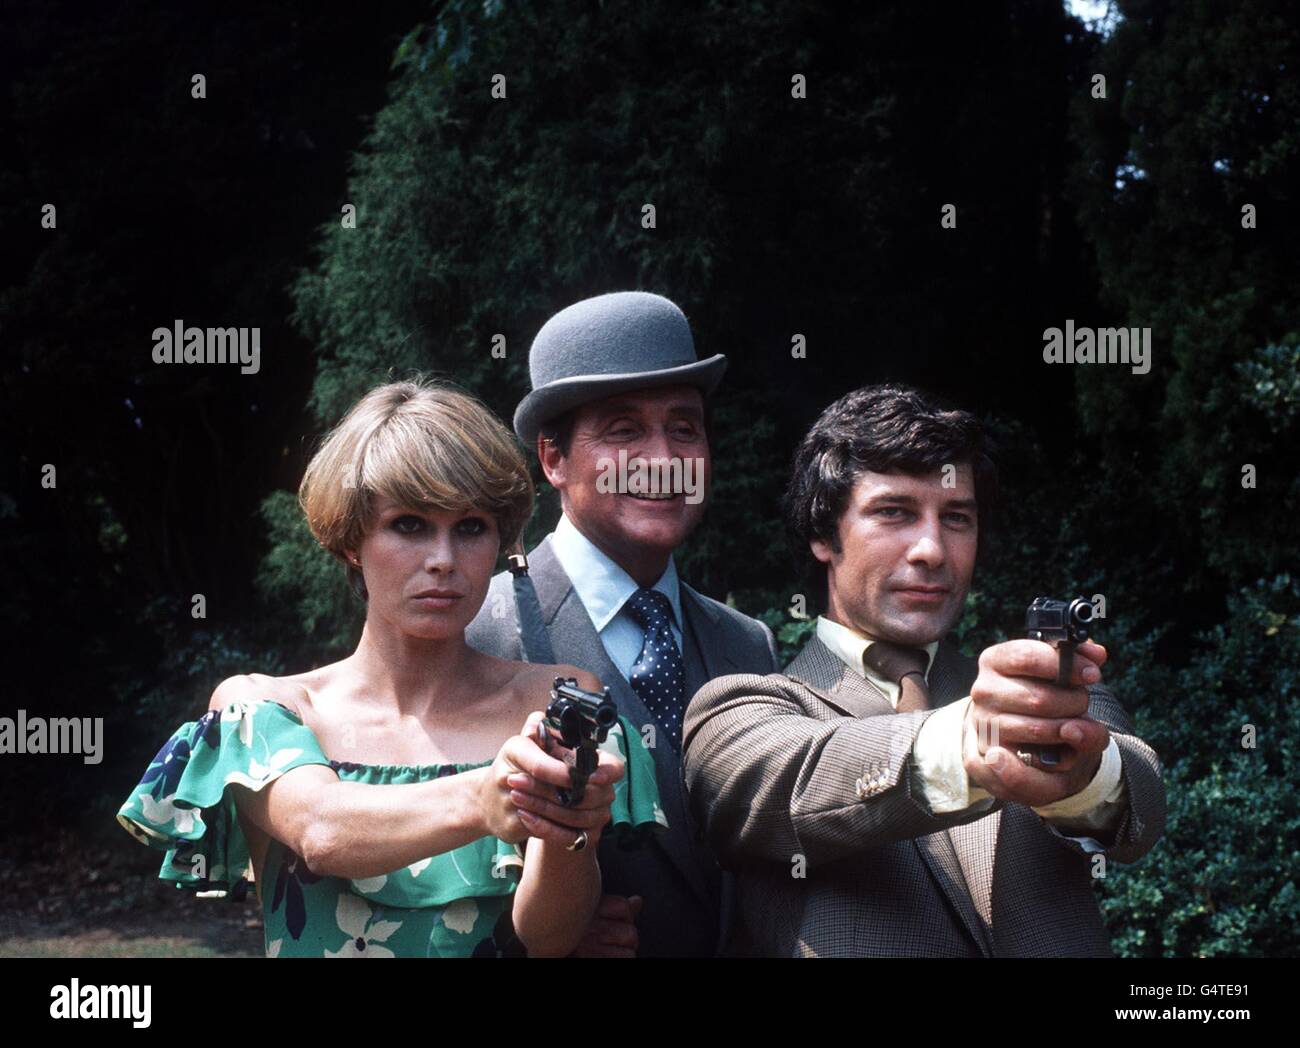 Patrick MacNee as bowler-hatted John Steed, Joanna Lumley, who plays Purdey and Gareth Hunt as Mike Gambit during the filming of the new television series of The Avengers (The New Avengers) at Pinewood Studios, Bucks. Stock Photo